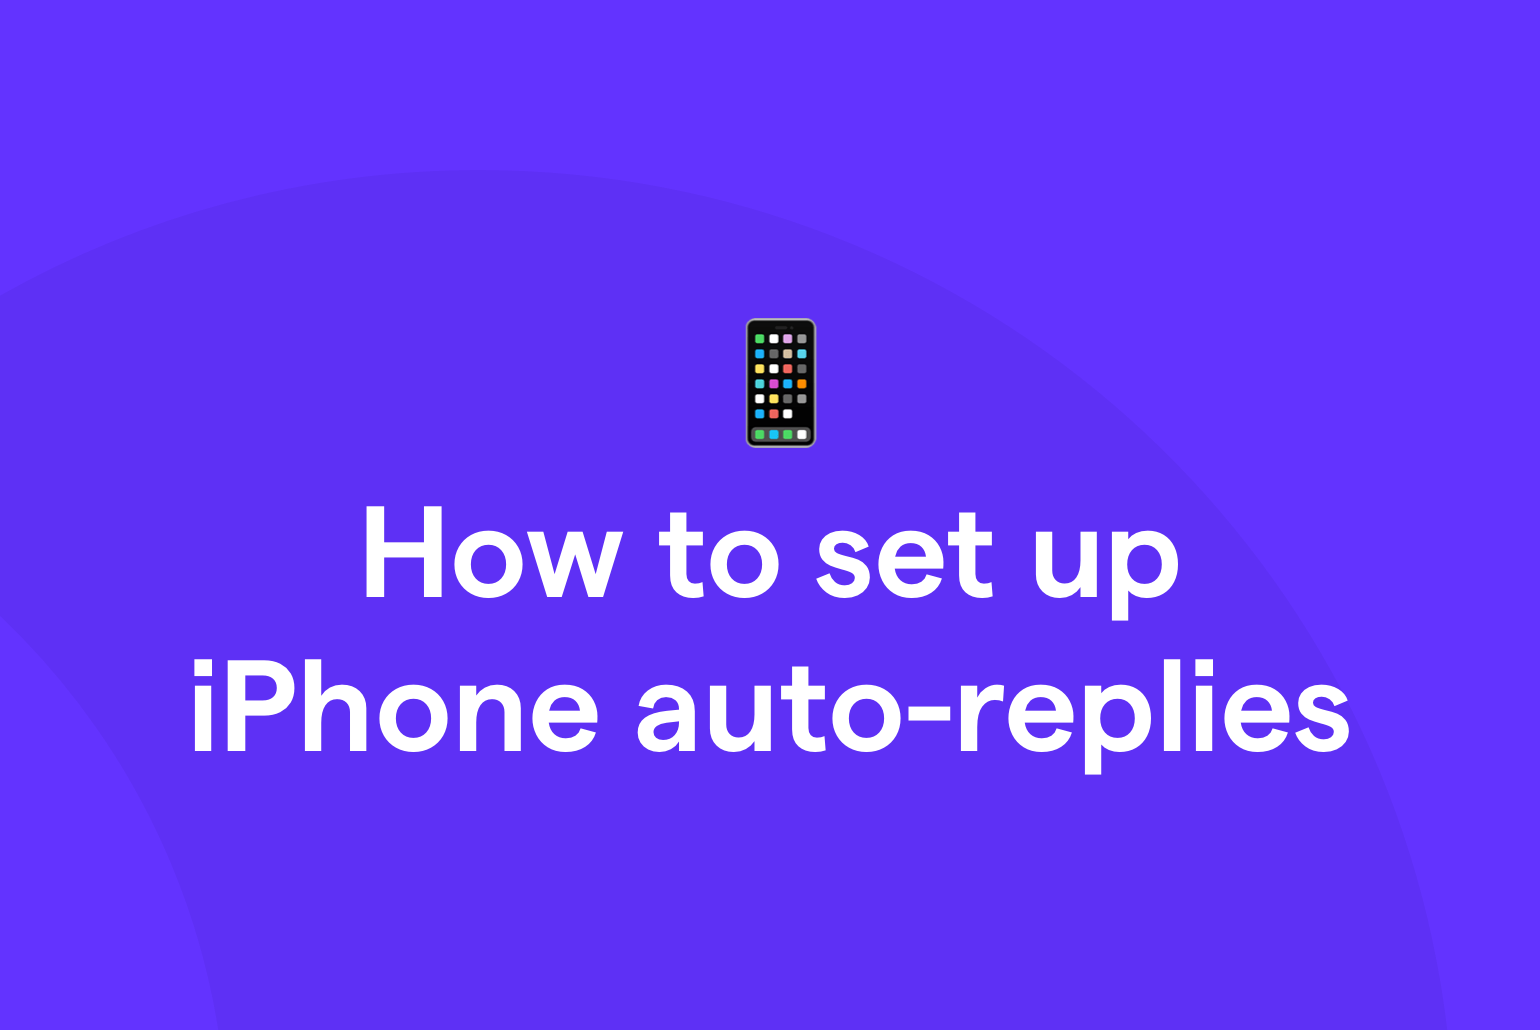 How to set up iPhone auto-replies